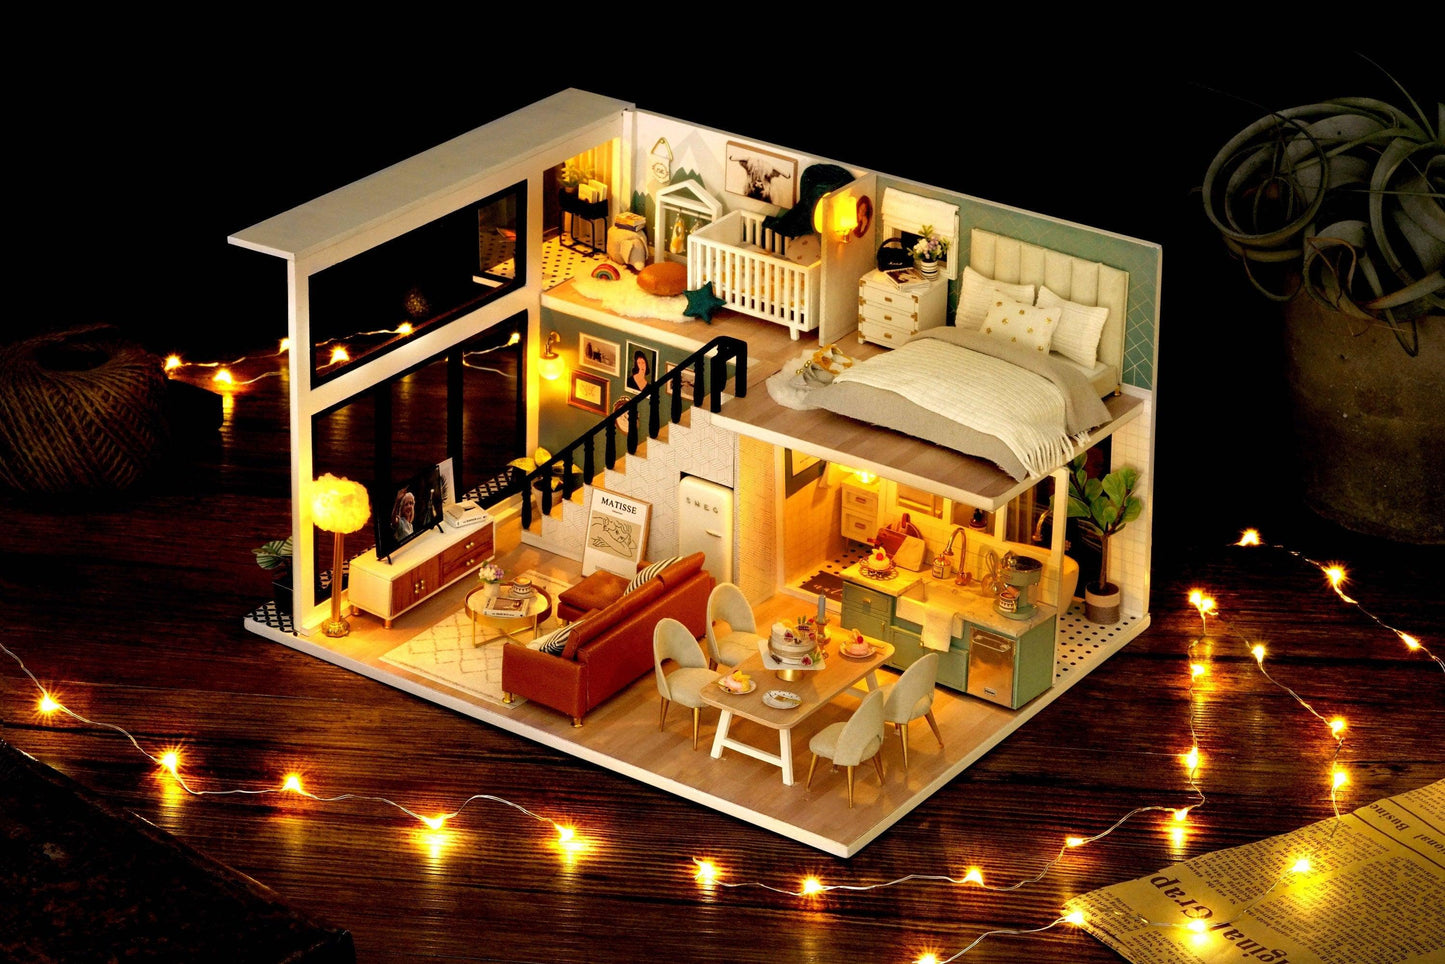 DIY Dollhouse Kit Comfortable Time Modern Style Living Apartment Gift - Living Room Miniature - Best Christmas, Birthday Gift for Children - Rajbharti Crafts